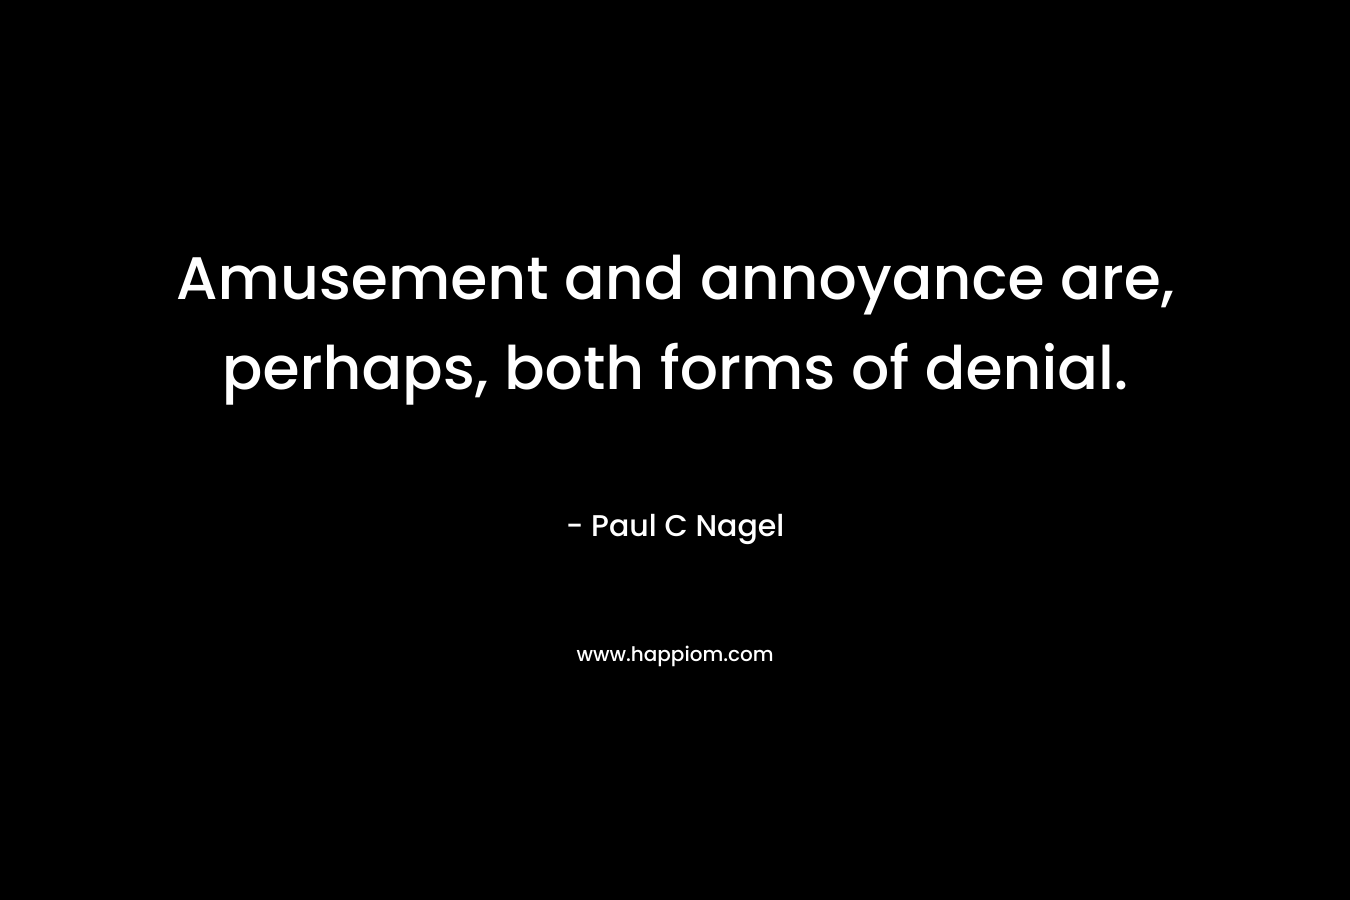 Amusement and annoyance are, perhaps, both forms of denial. – Paul C Nagel